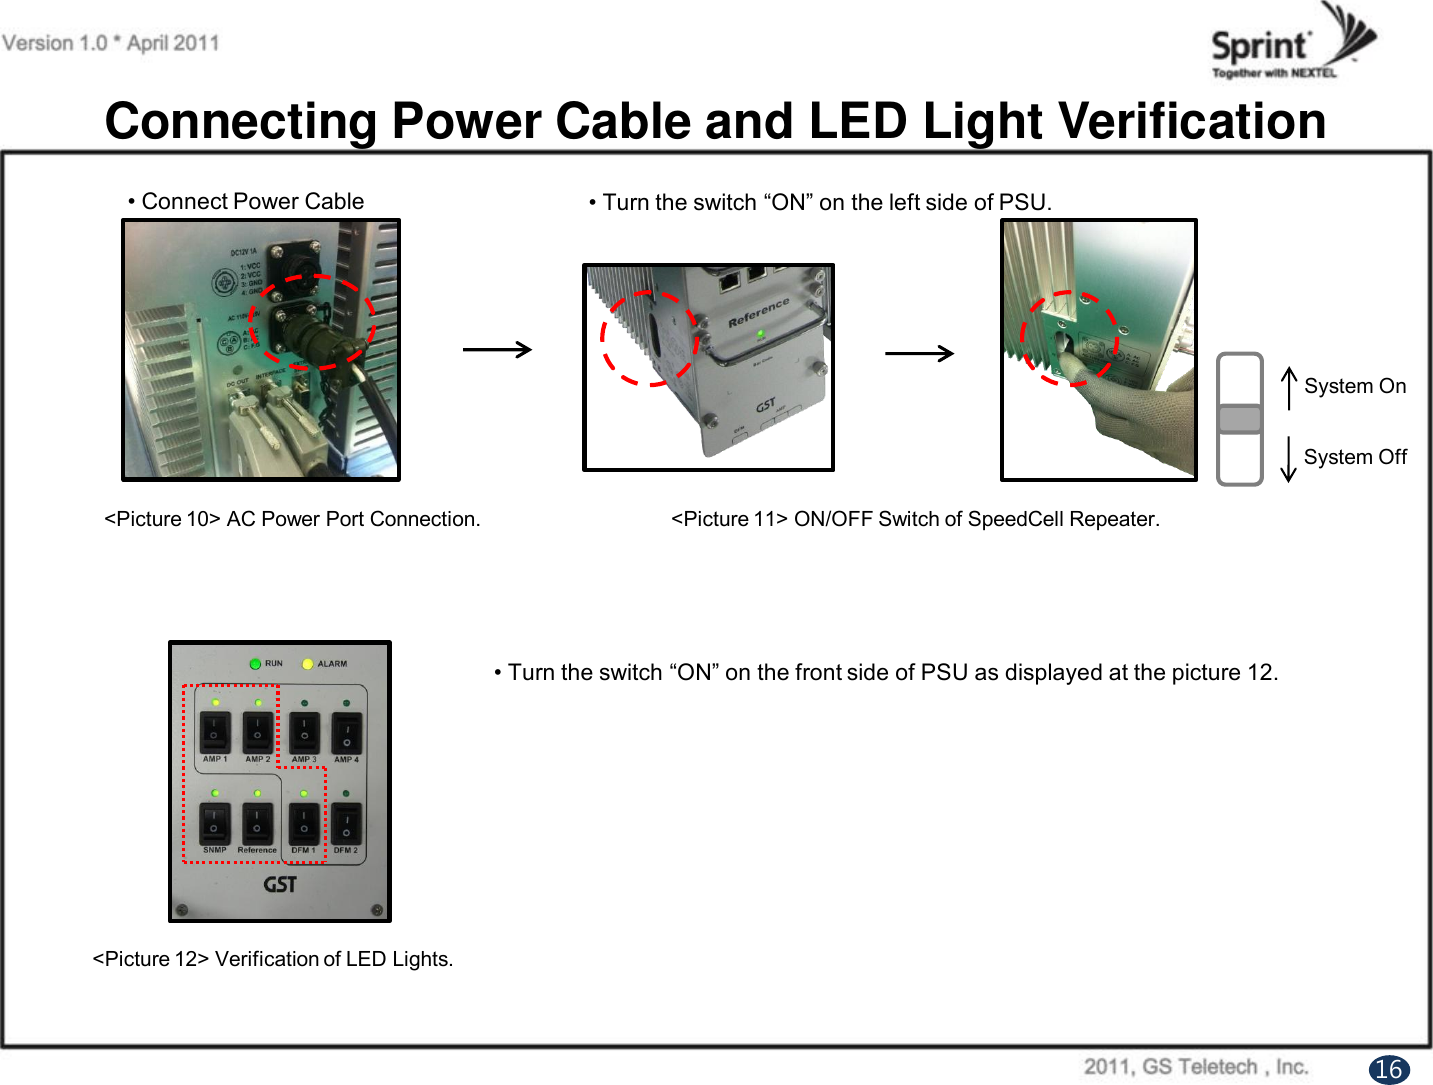 Connecting Power Cable and LED Light Verification• Connect Power Cable16&lt;Picture 10&gt; AC Power Port Connection.System OnSystem Off&lt;Picture 12&gt; Verification of LED Lights.• Turn the switch “ON” on the left side of PSU.  &lt;Picture 11&gt; ON/OFF Switch of SpeedCell Repeater.• Turn the switch “ON” on the front side of PSU as displayed at the picture 12. 